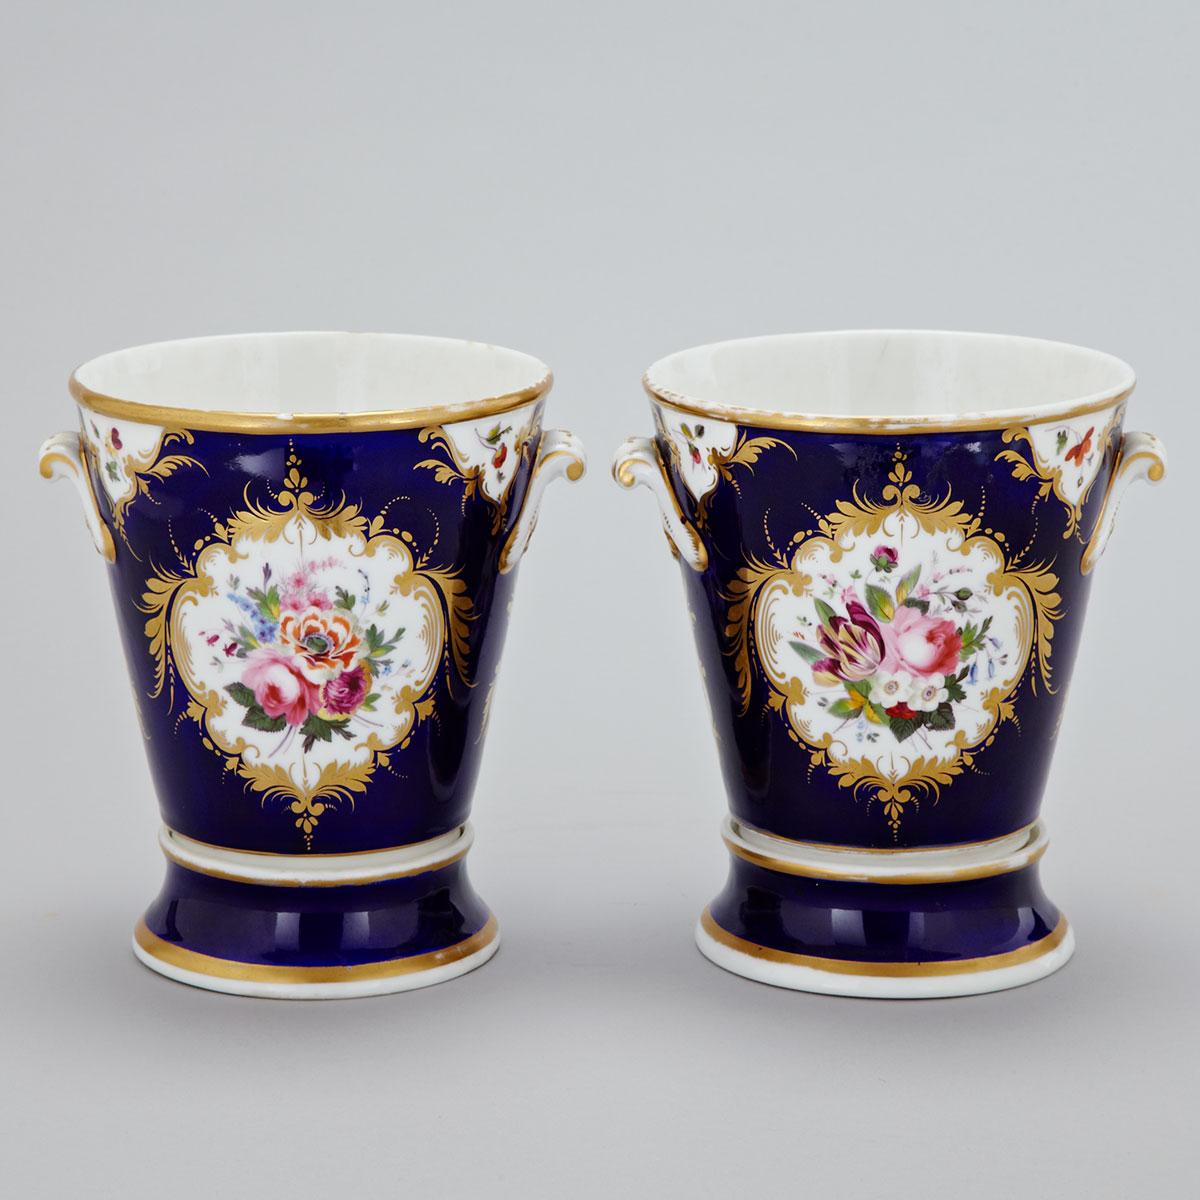 Pair of Chamberlains Worcester Blue-Ground Cachepots and Stands, c.1820